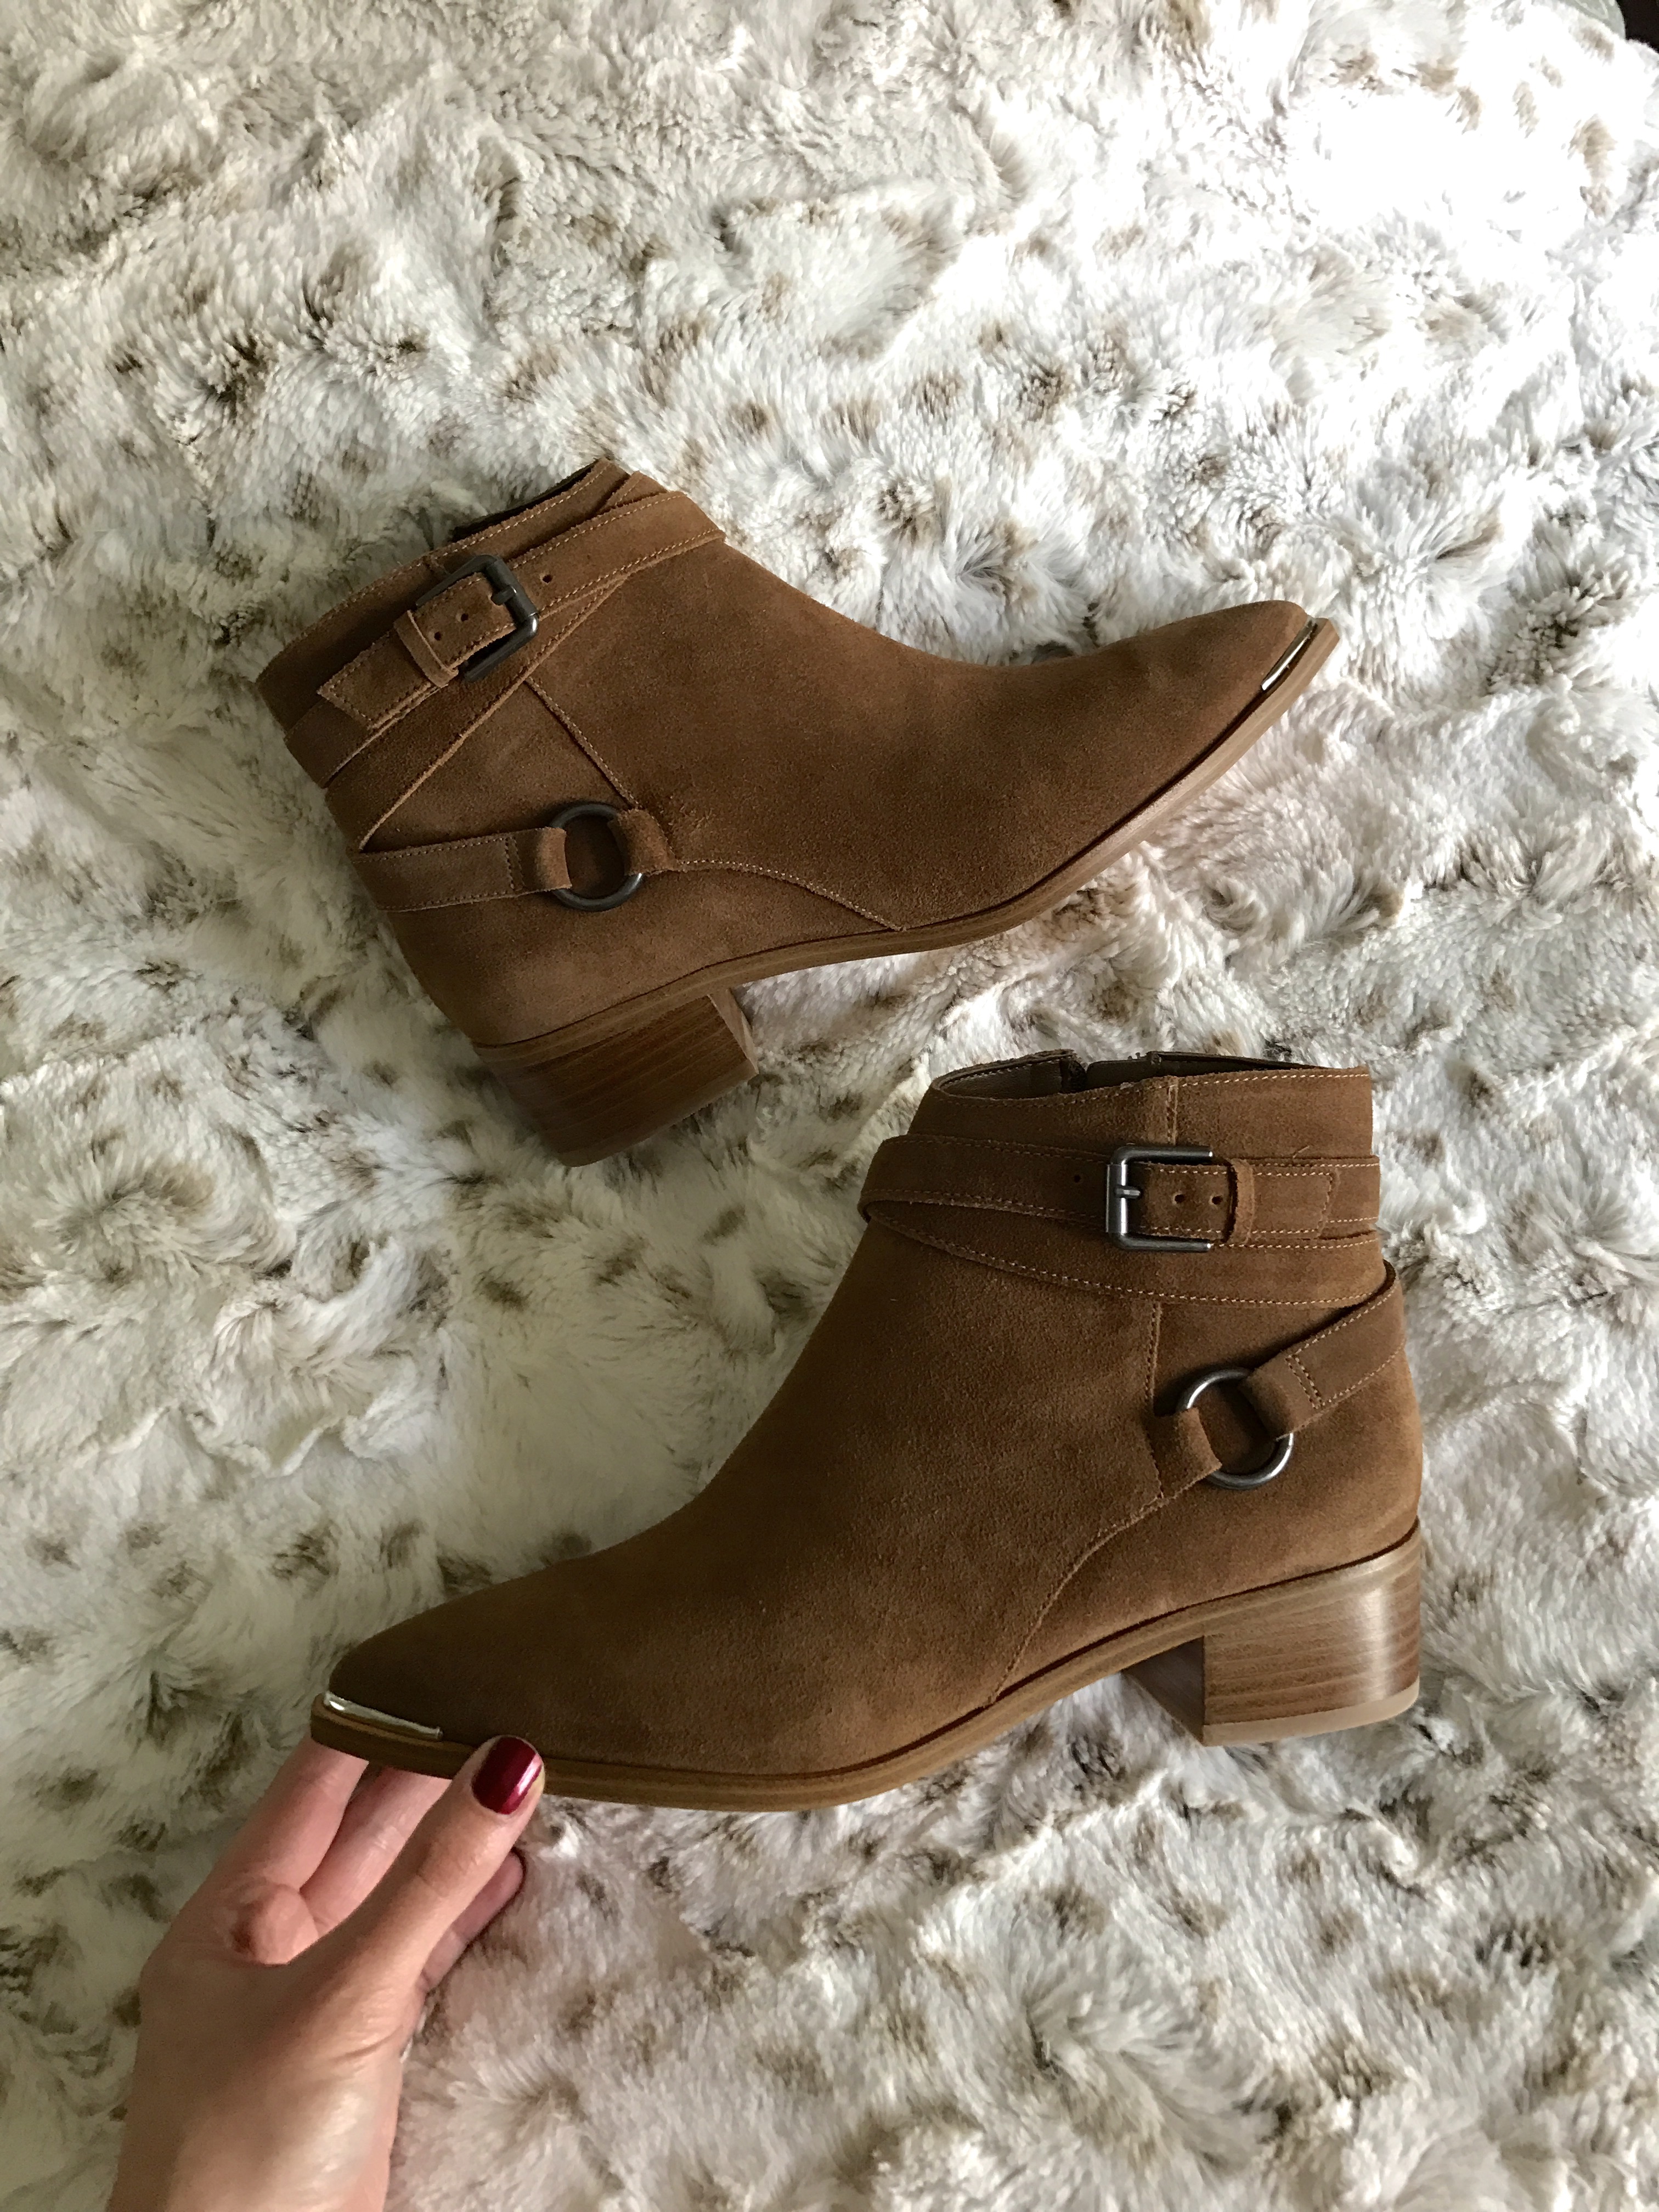 marc fisher ankle boots